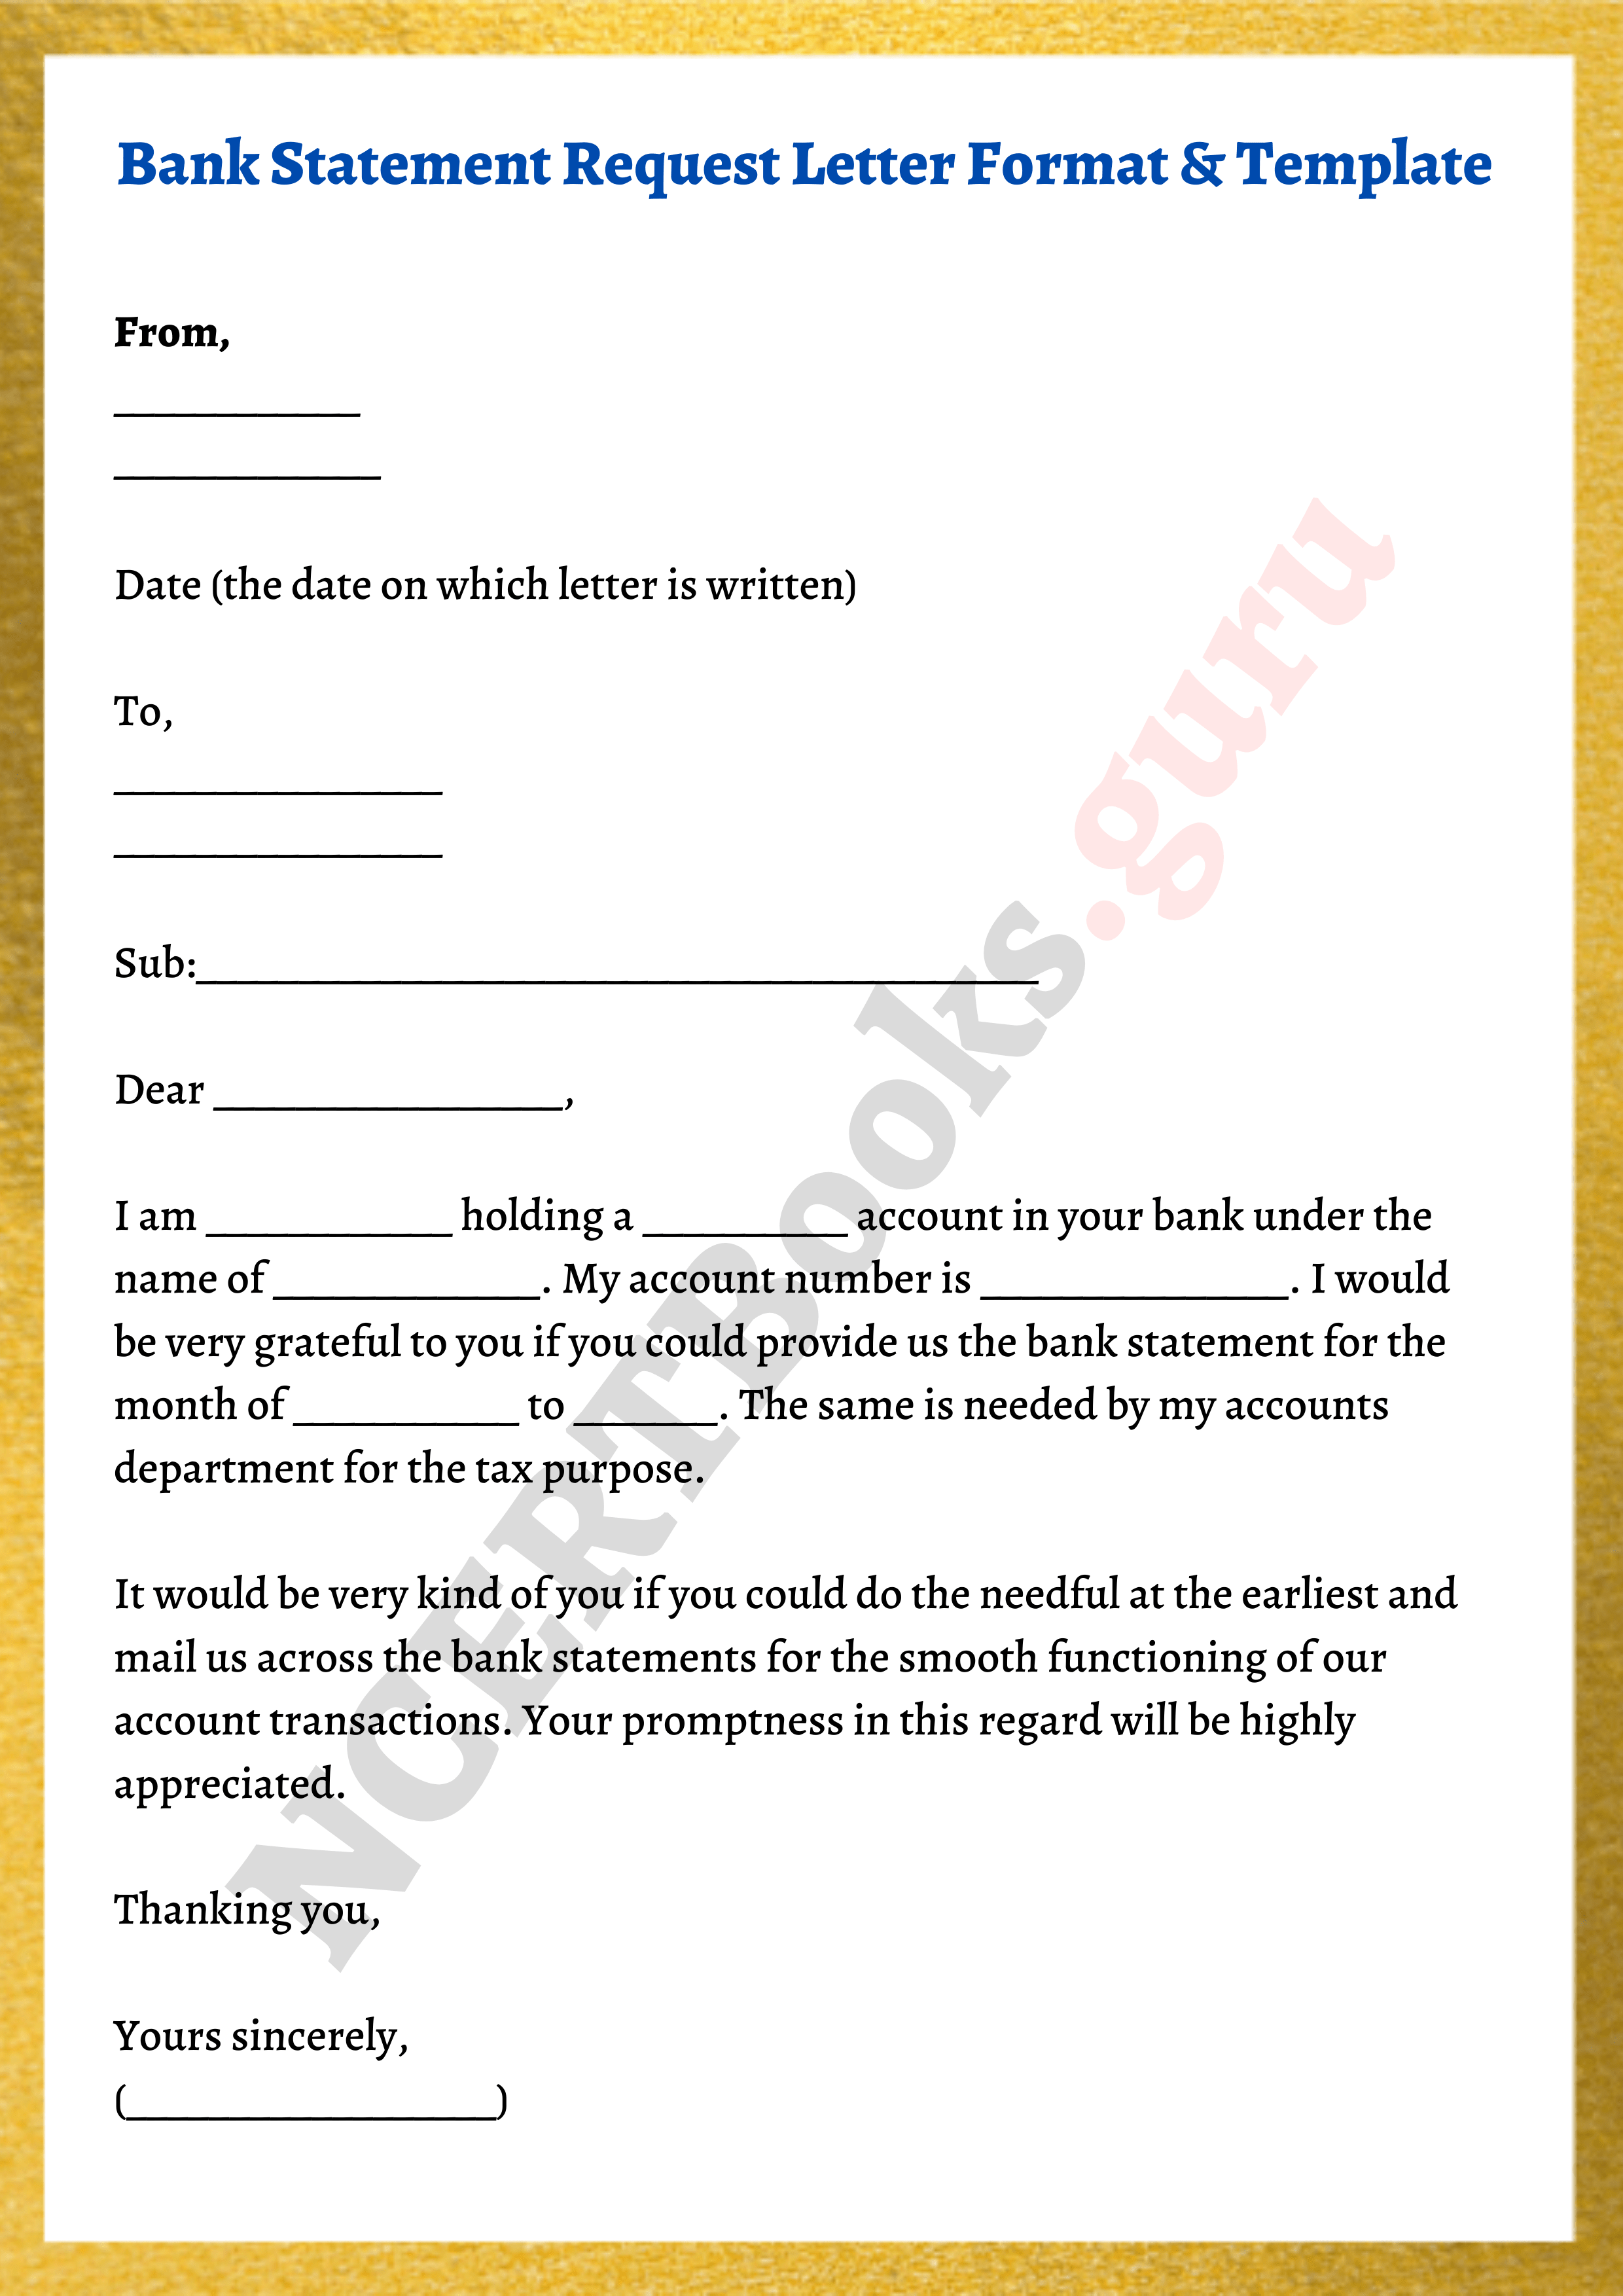 format of bank statement request letter